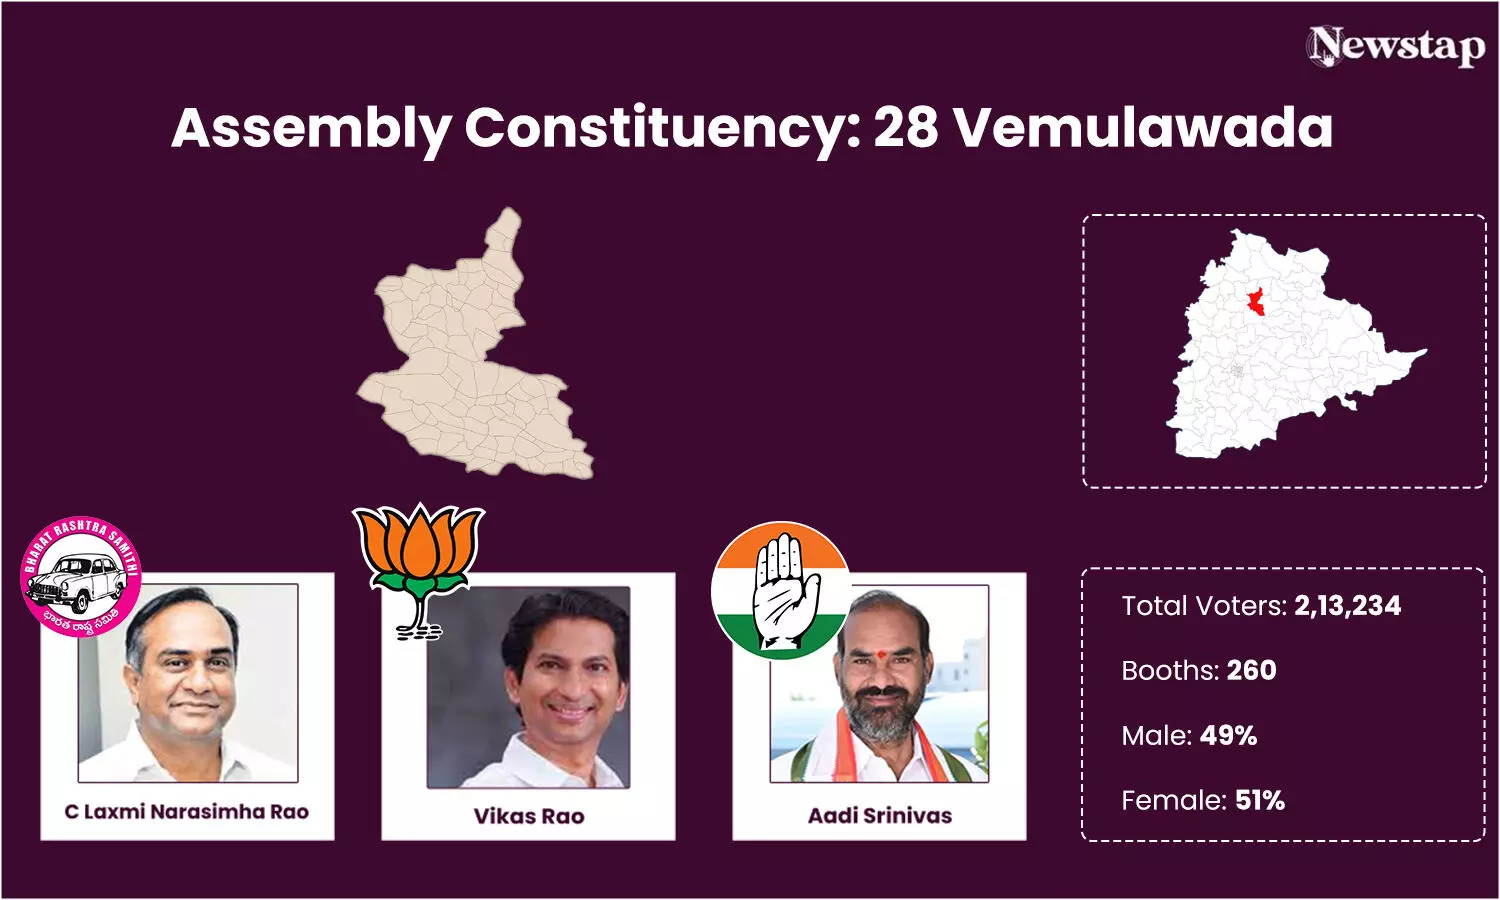 Tough triangular fight for Vemulawada after parties change candidates in quick succession